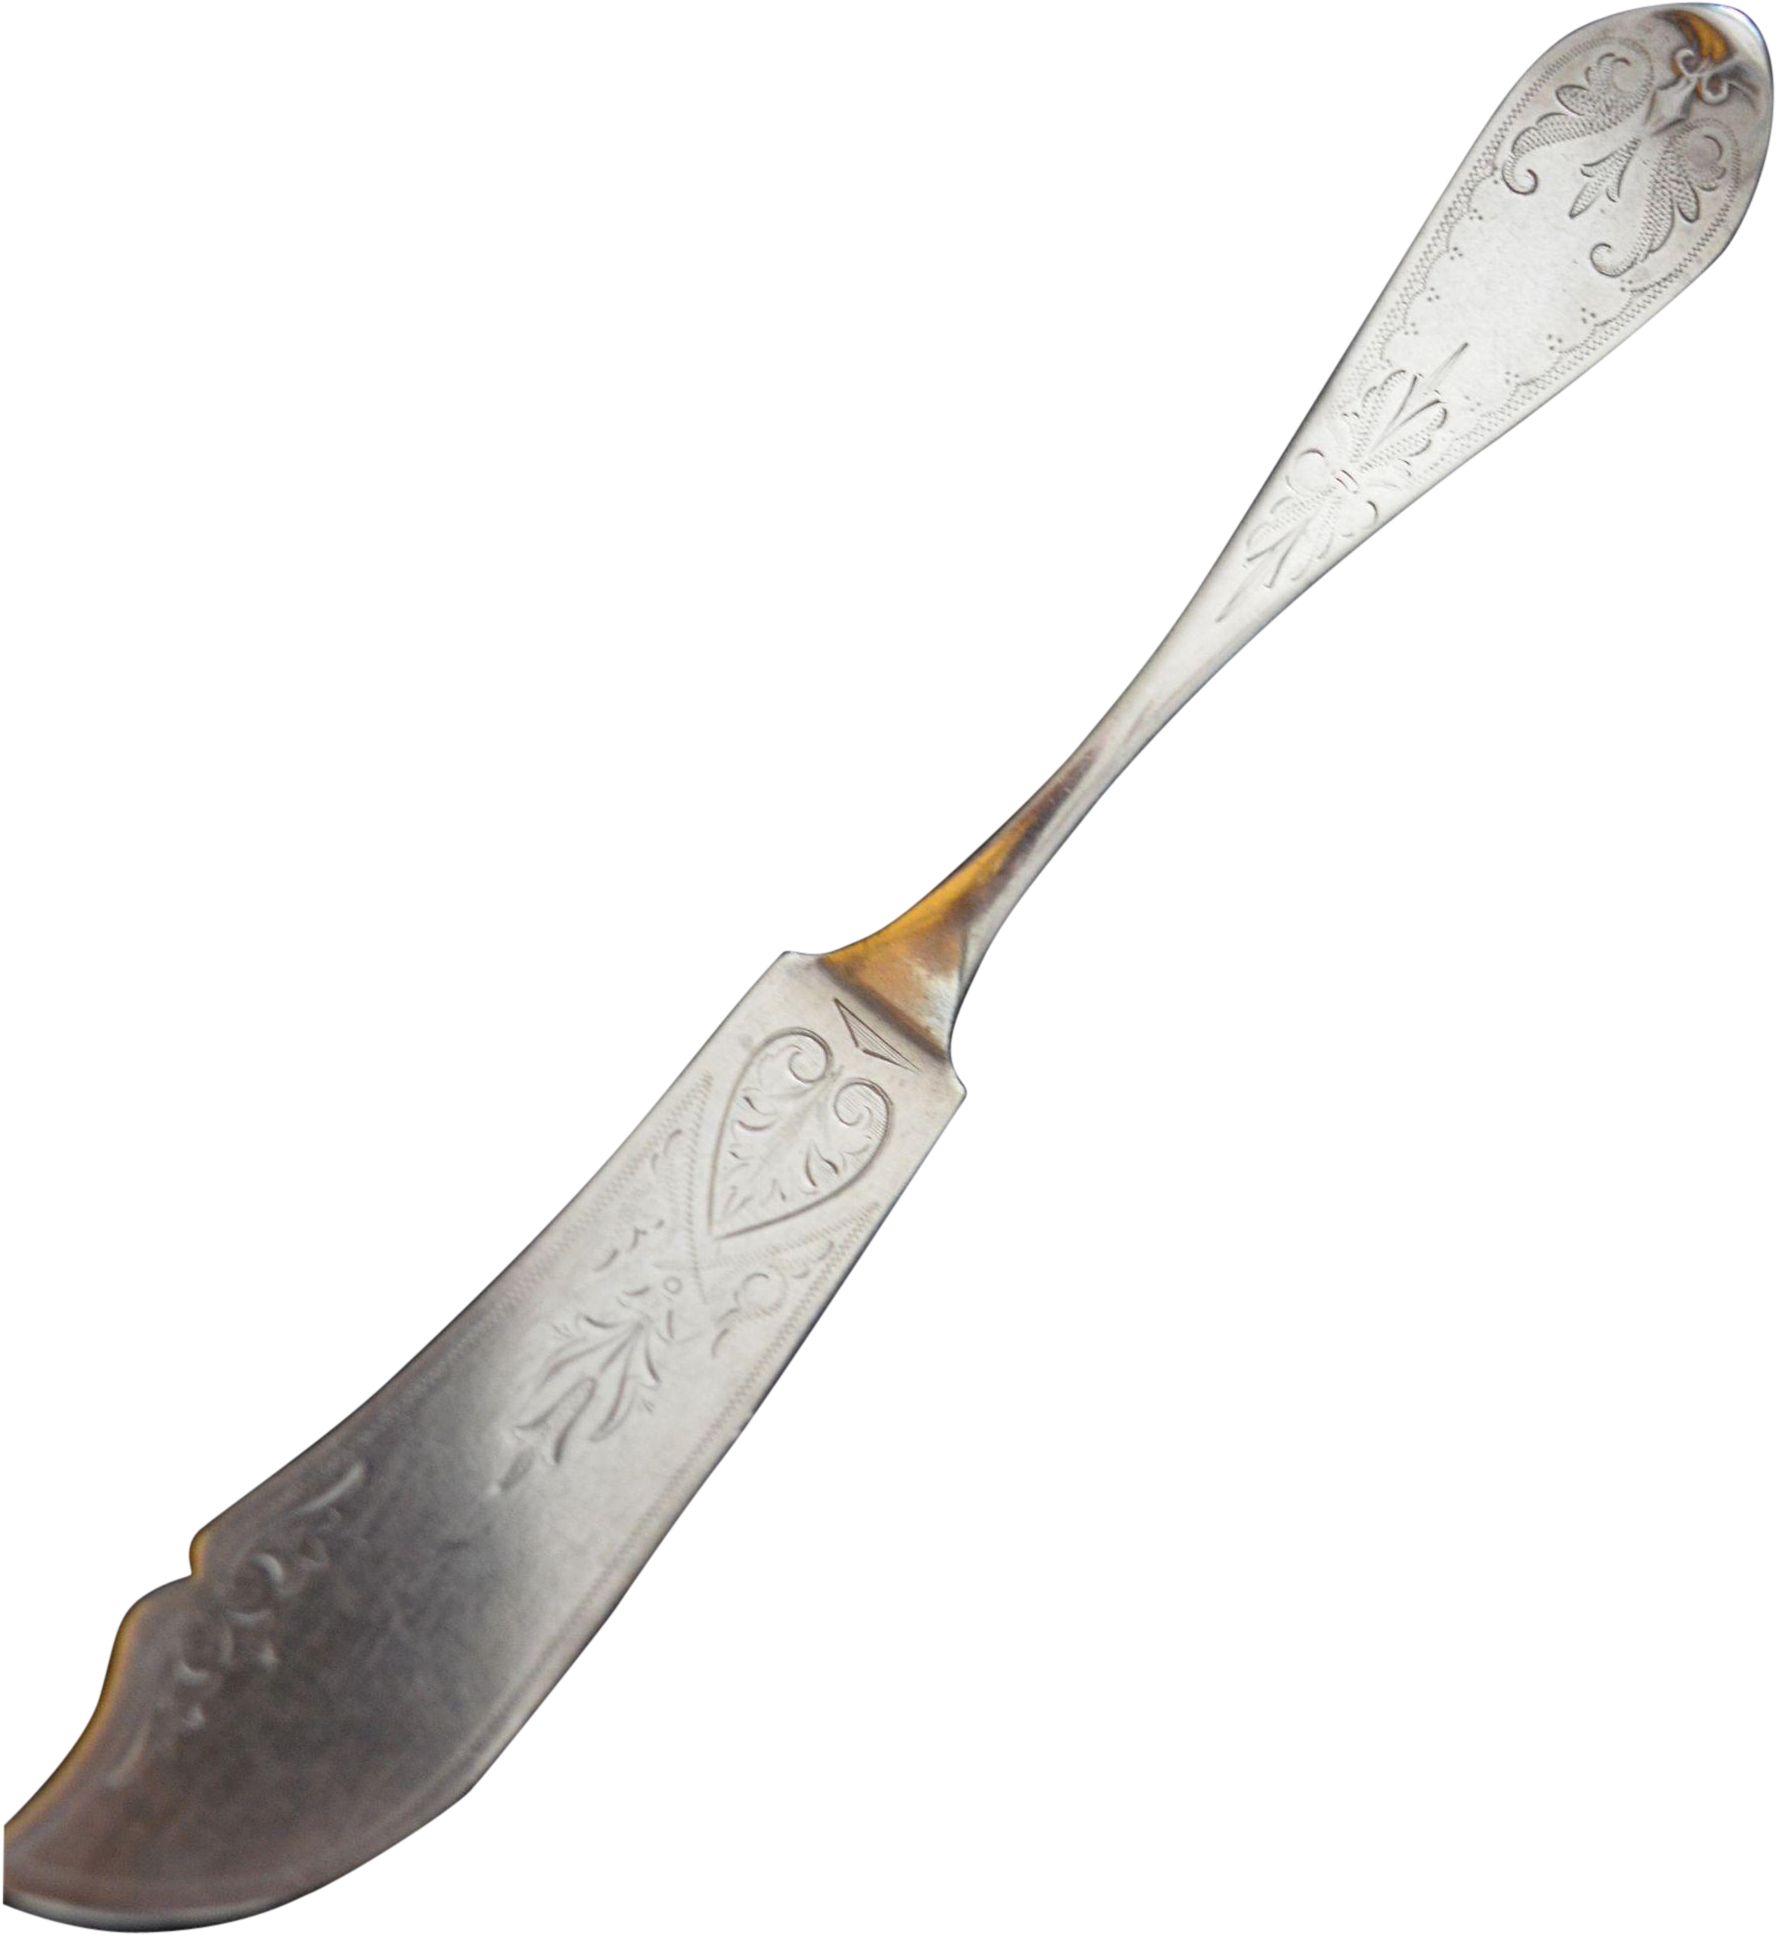 Steel Butter Knife Photos Download Free Image PNG Image